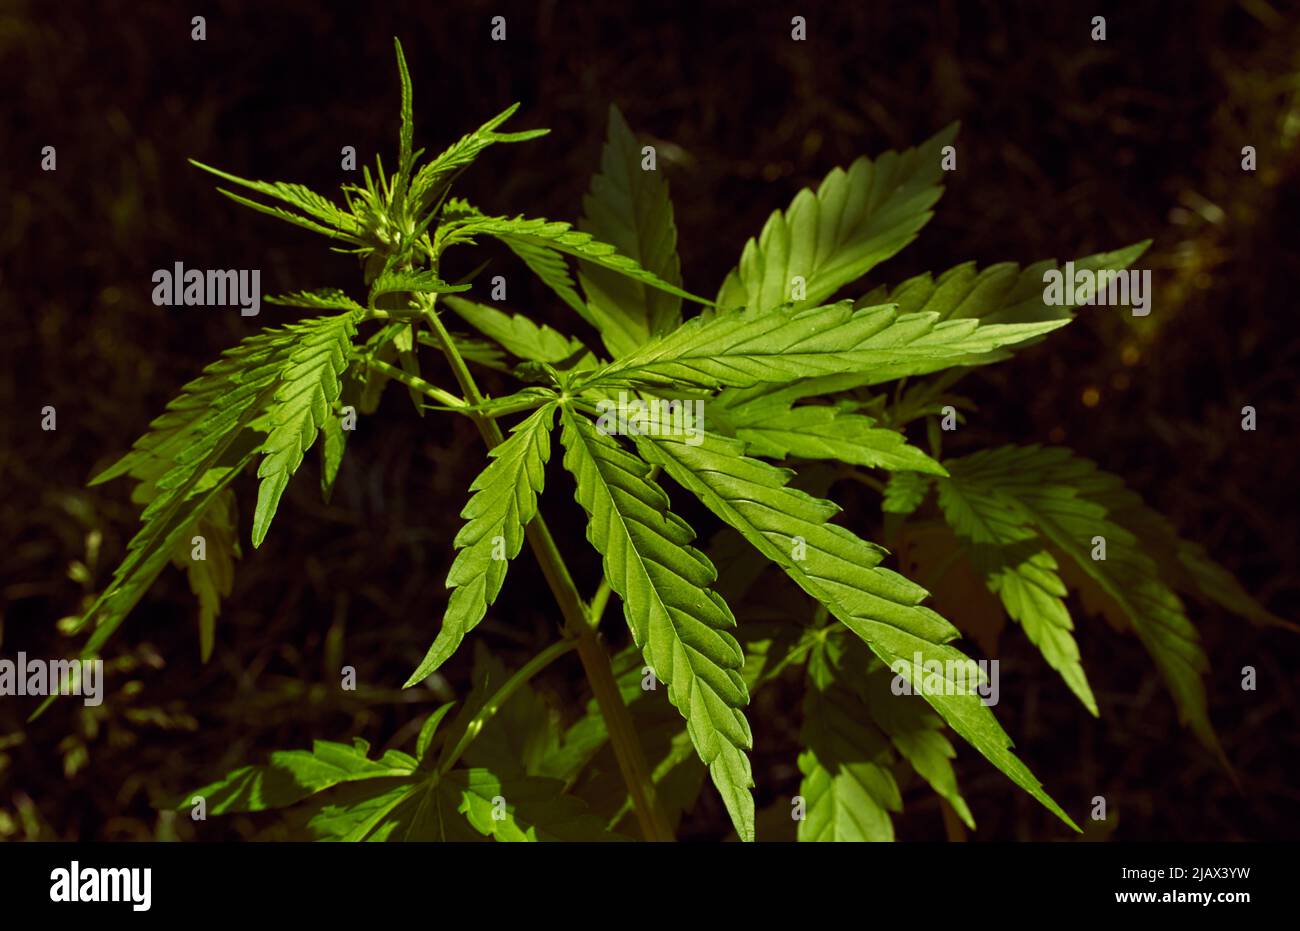 Photo of medicinal marijuana (cannabis) leaves with blurry background Stock Photo